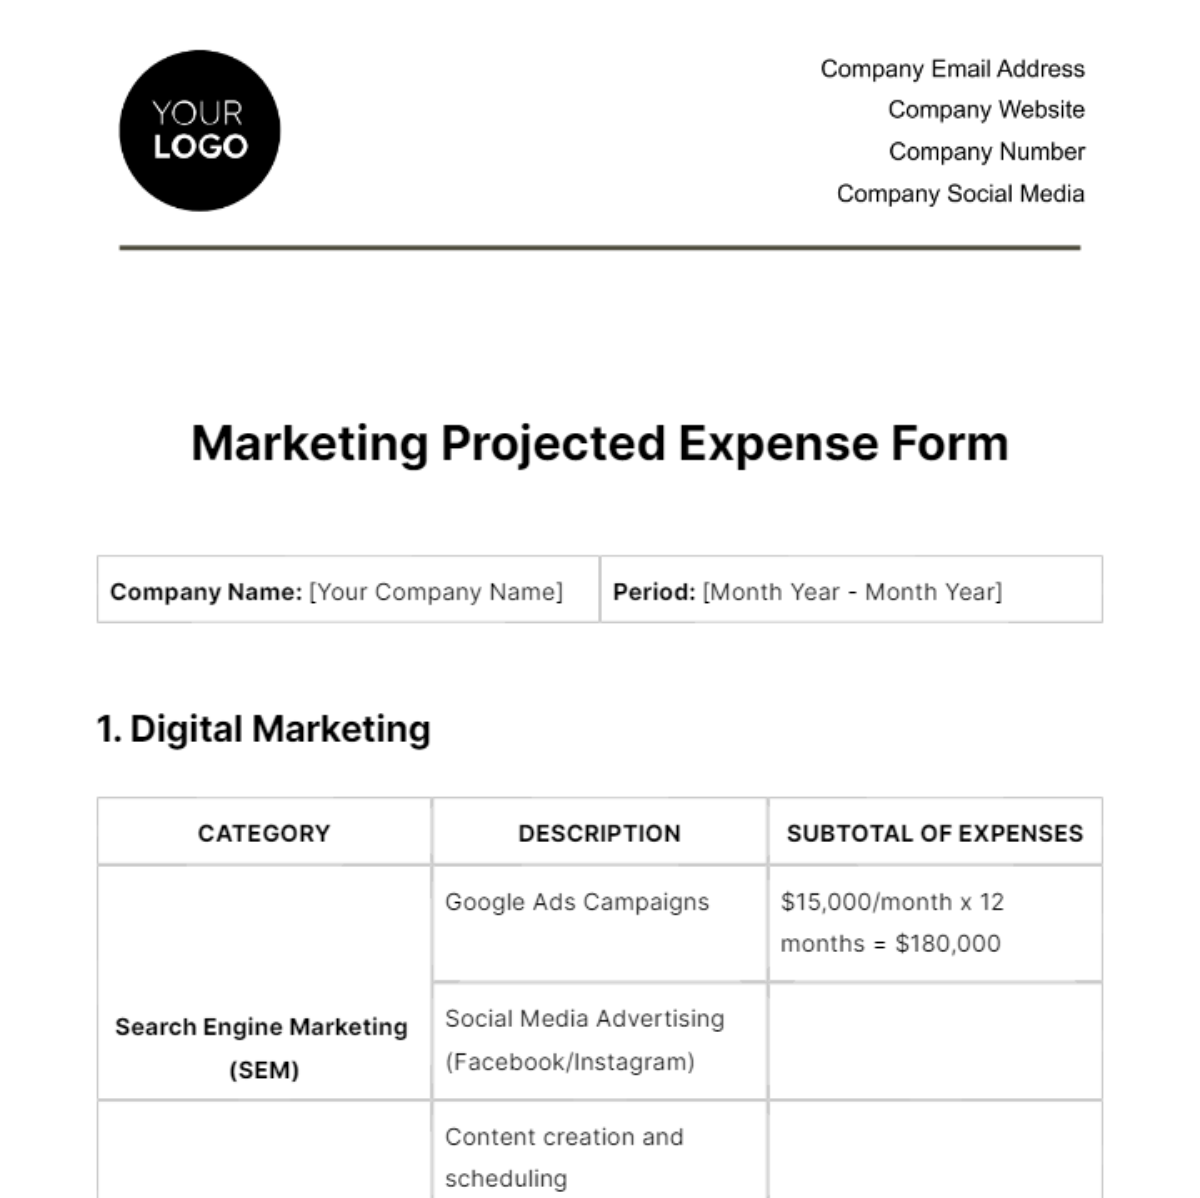 Free Marketing Projected Expense Form Template